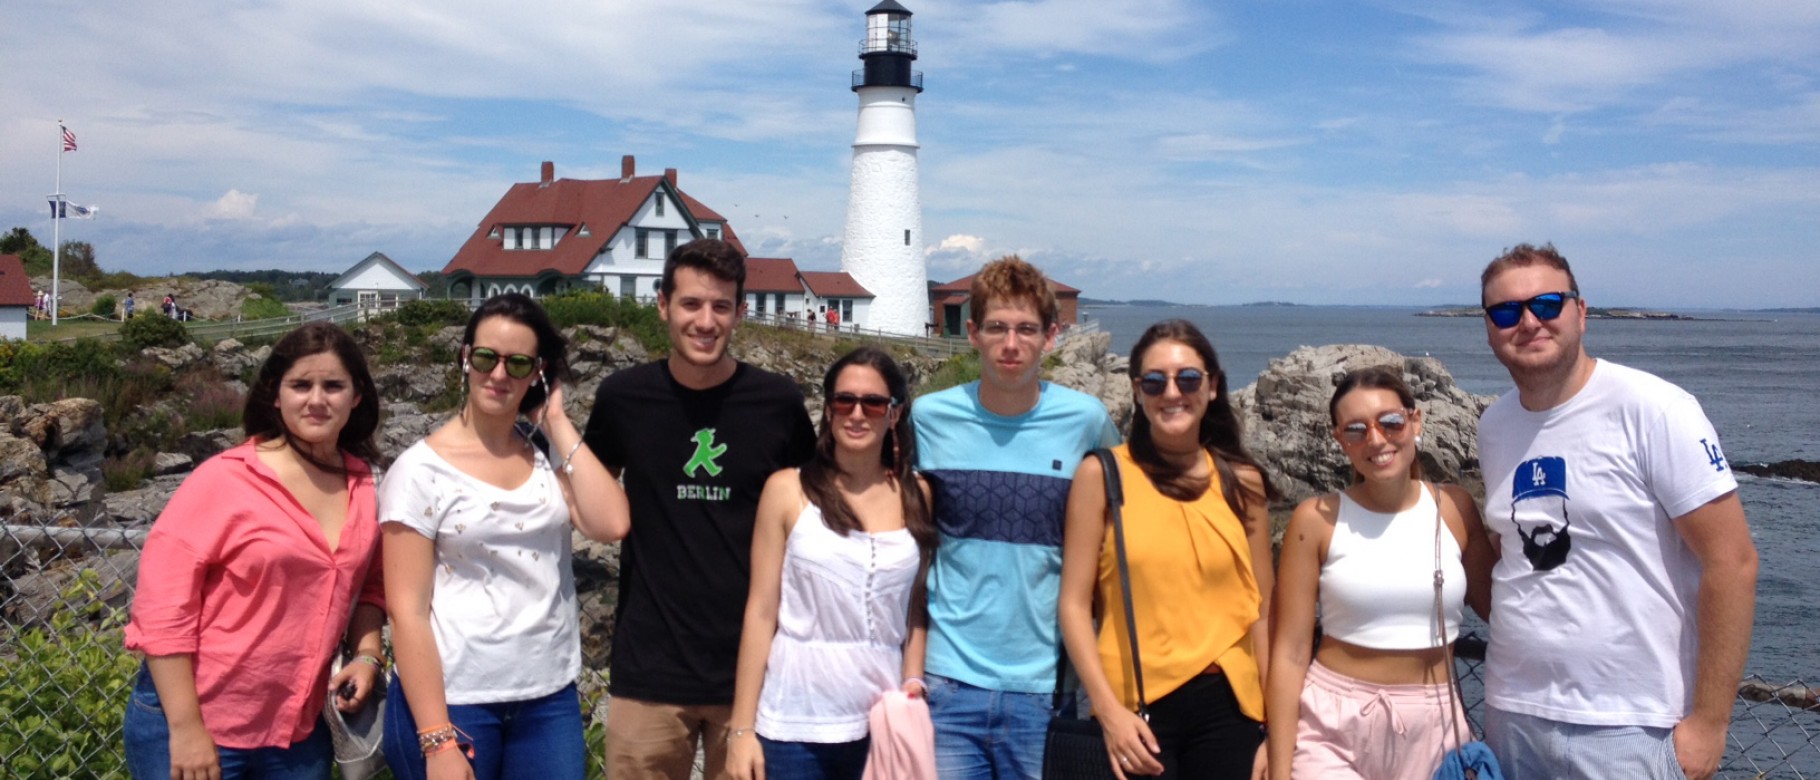 Eight students from the University of Granada in Andalusia, Spain, are in Maine for four weeks to study at the College of